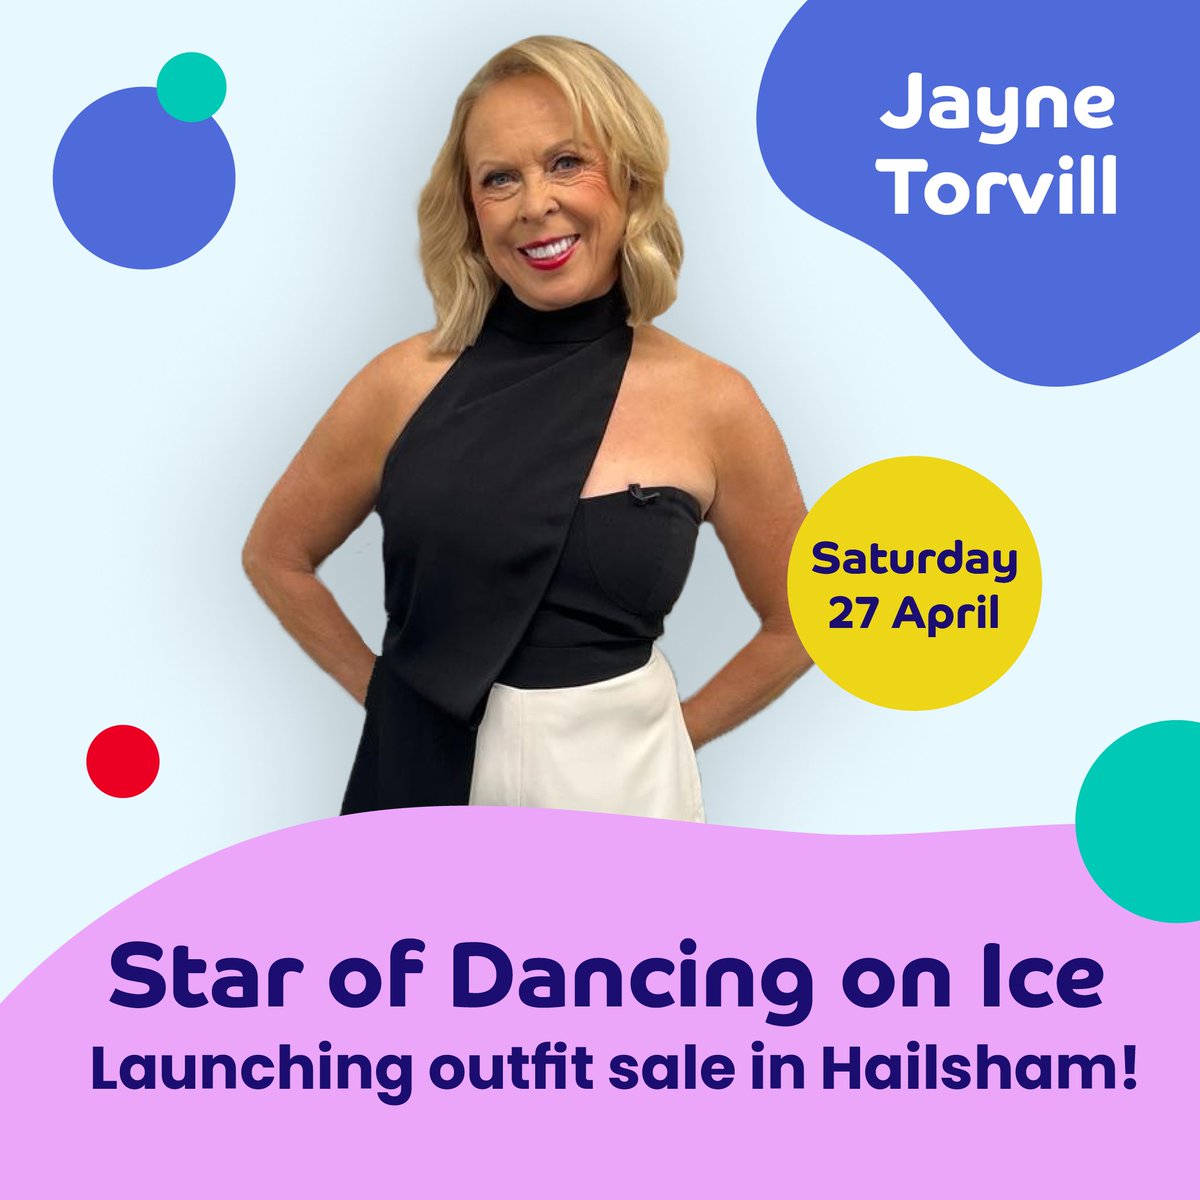 #Demelza celebrity ambassador @torvillanddean has kindly donated some of her famous @DancingonIce dresses which will be landing in some of our charity shops! ⛸ 👗 🛍️ Join Jayne for a grand reveal in Hailsham: 🗓️ Saturday 27 April ⏰ 11:30am 📍 20 High Street Hailsham, BN27 1BJ